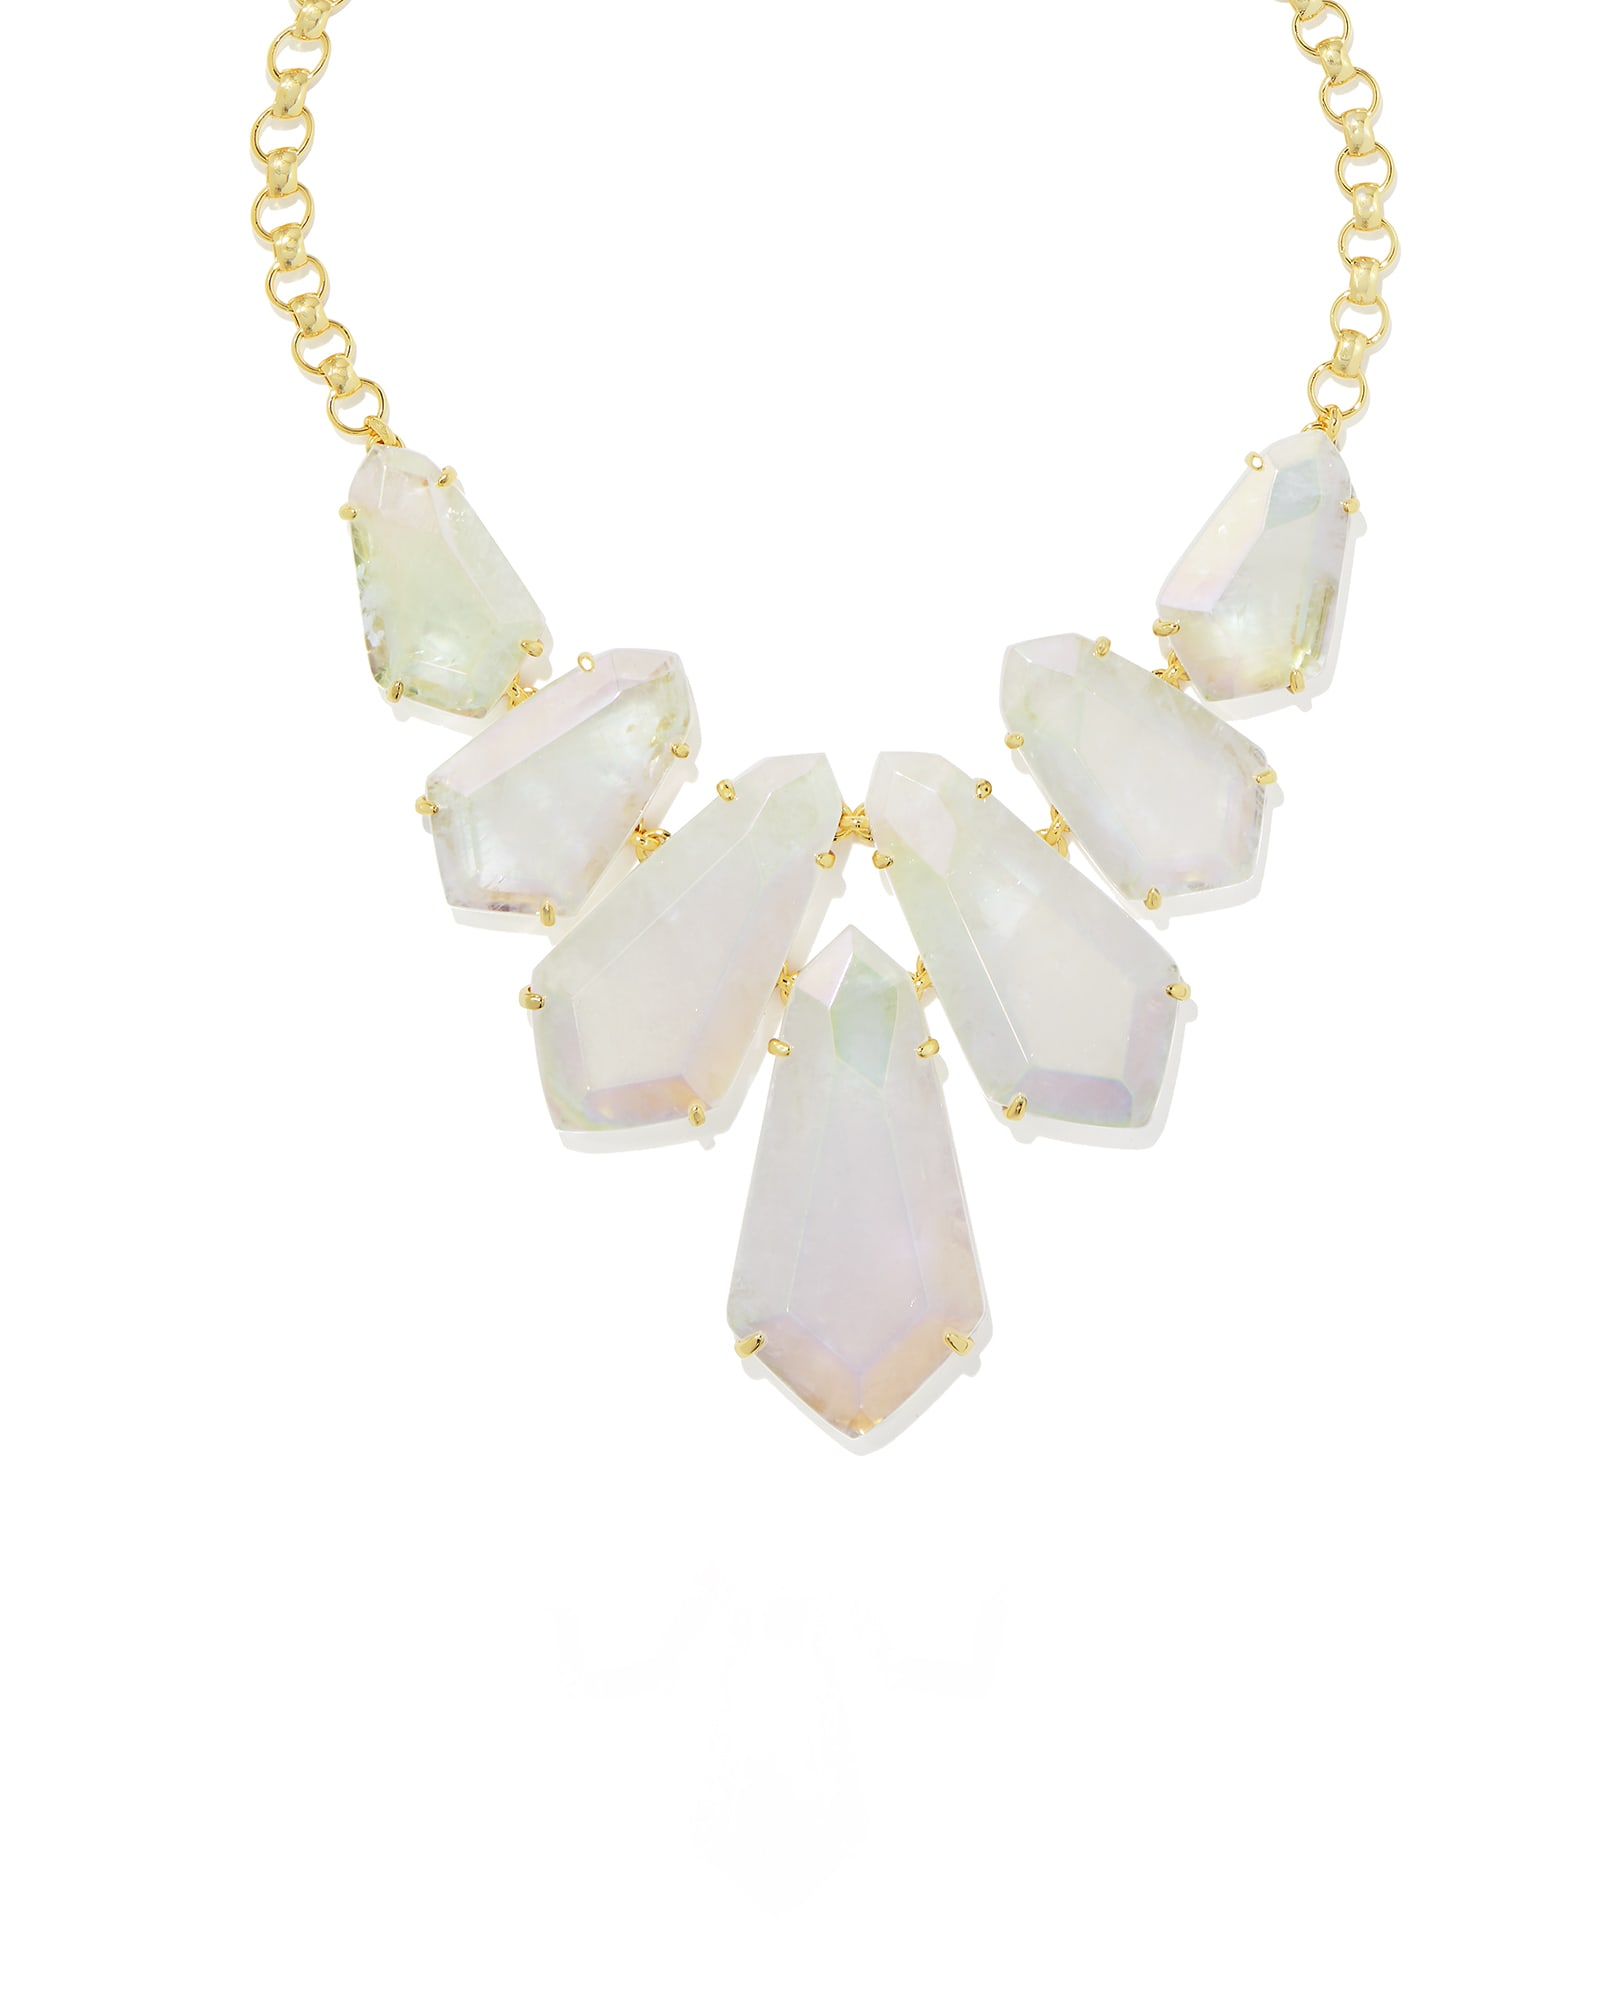 Loris Gold Statement Necklace in Iridescent Clear Rock Crystal